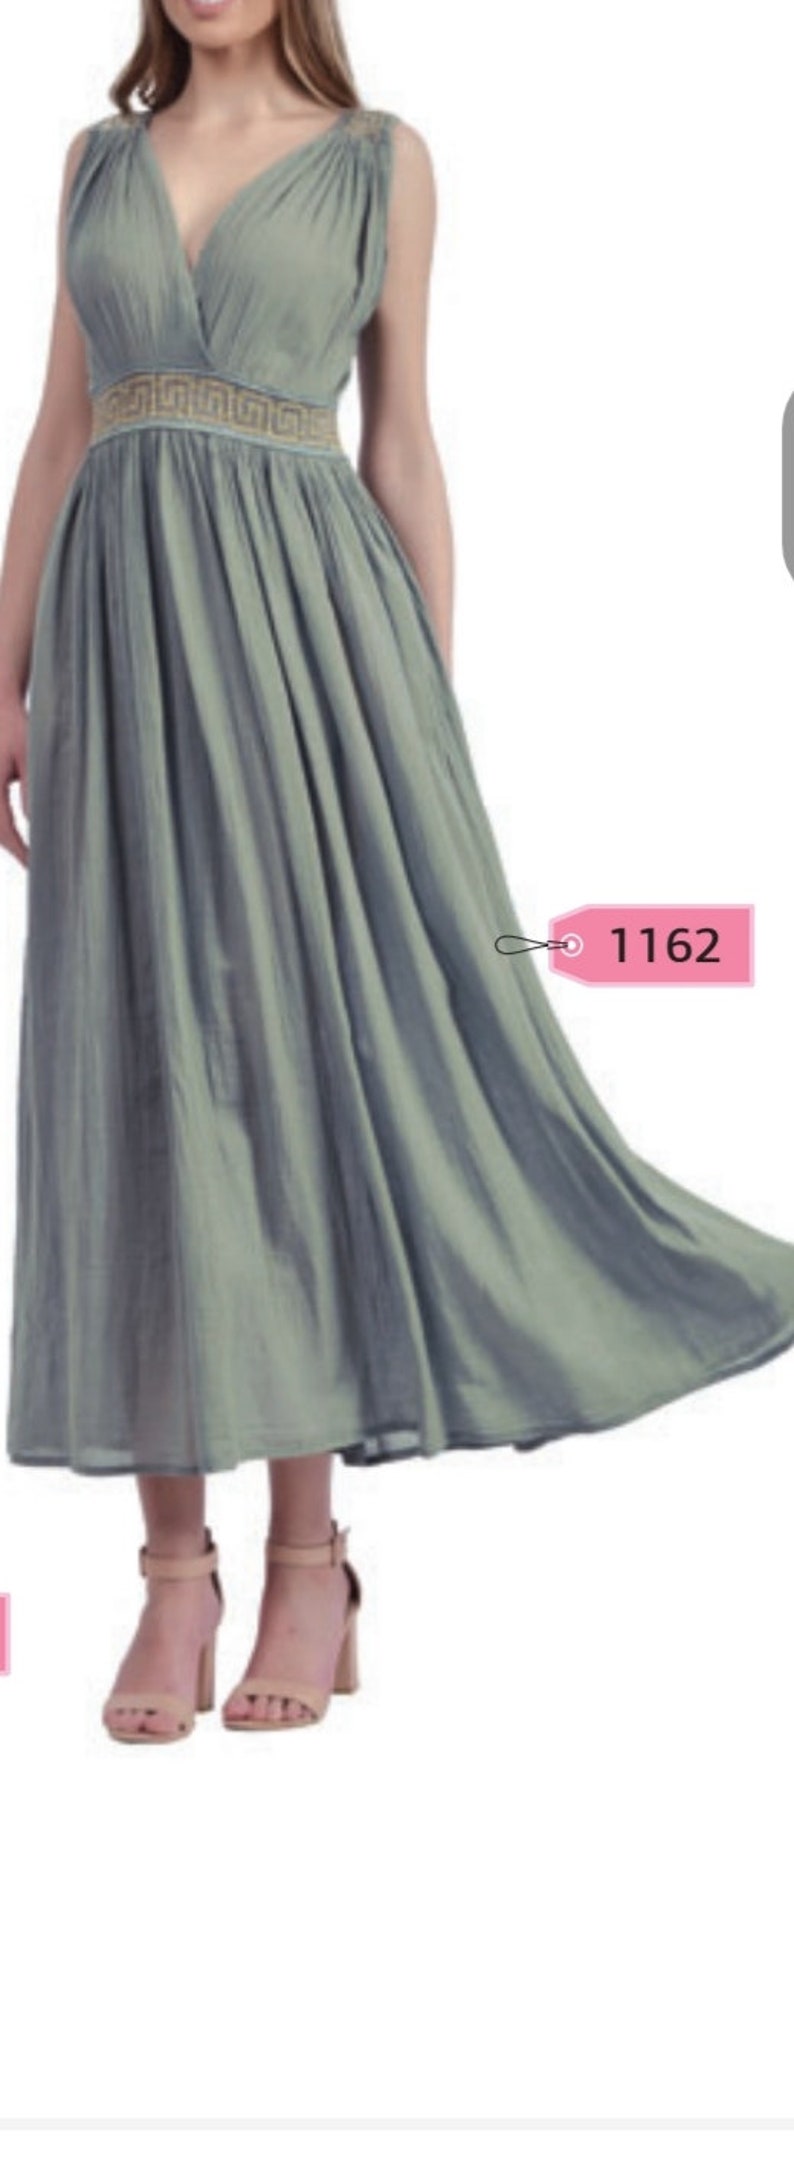 Long dress inspired from ancient Greece Classic